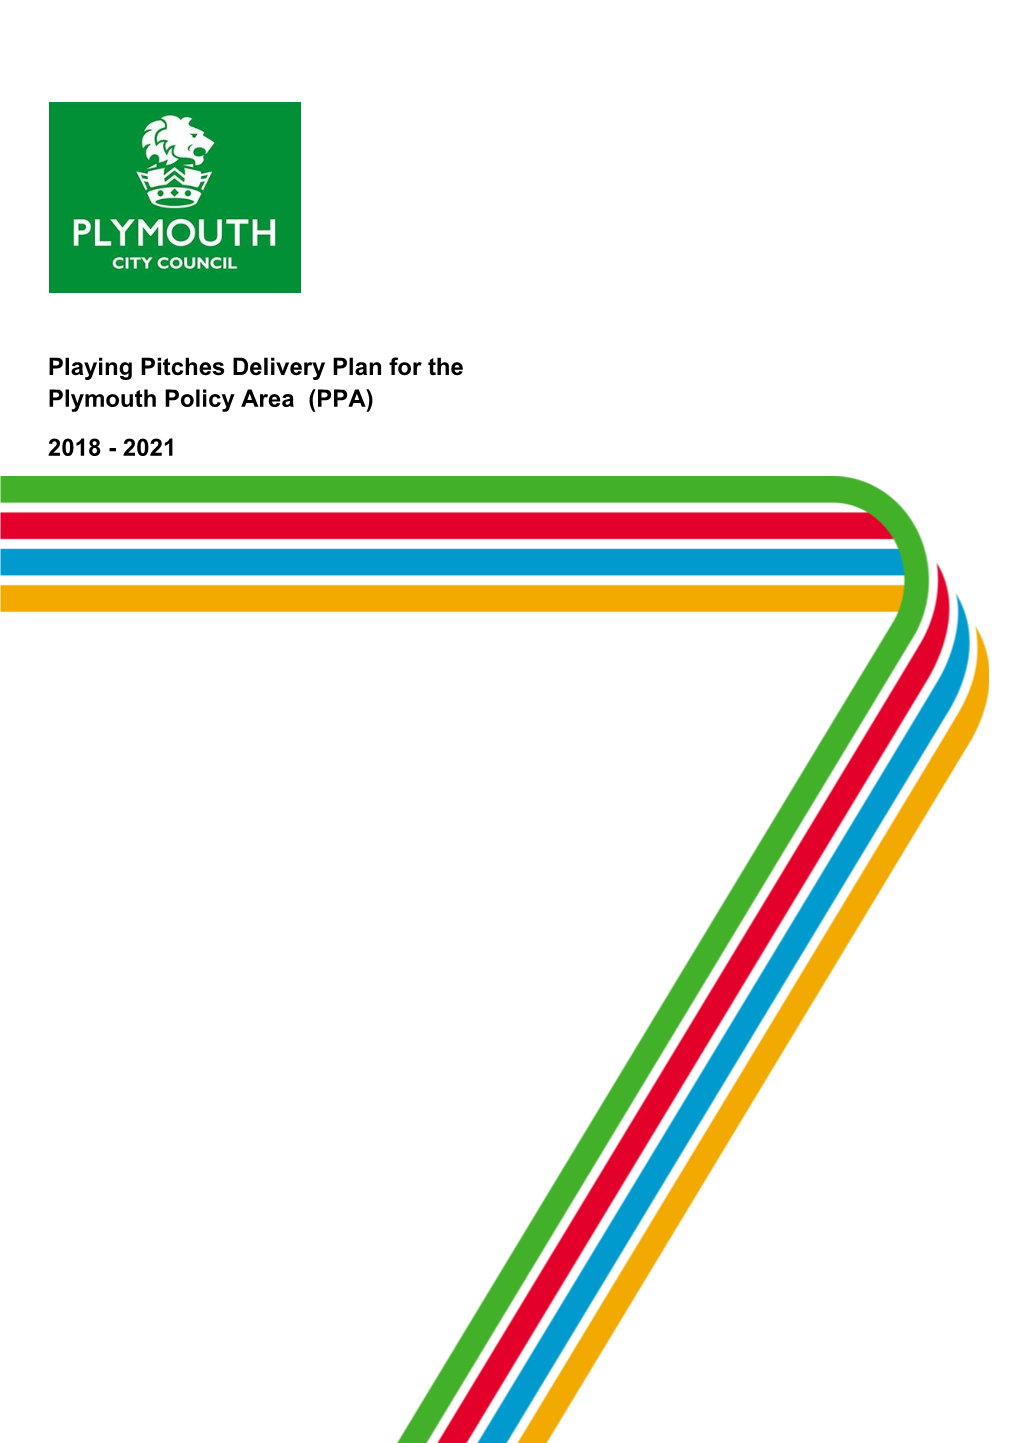 Playing Pitches Delivery Plan for the Plymouth Policy Area (PPA) 2018